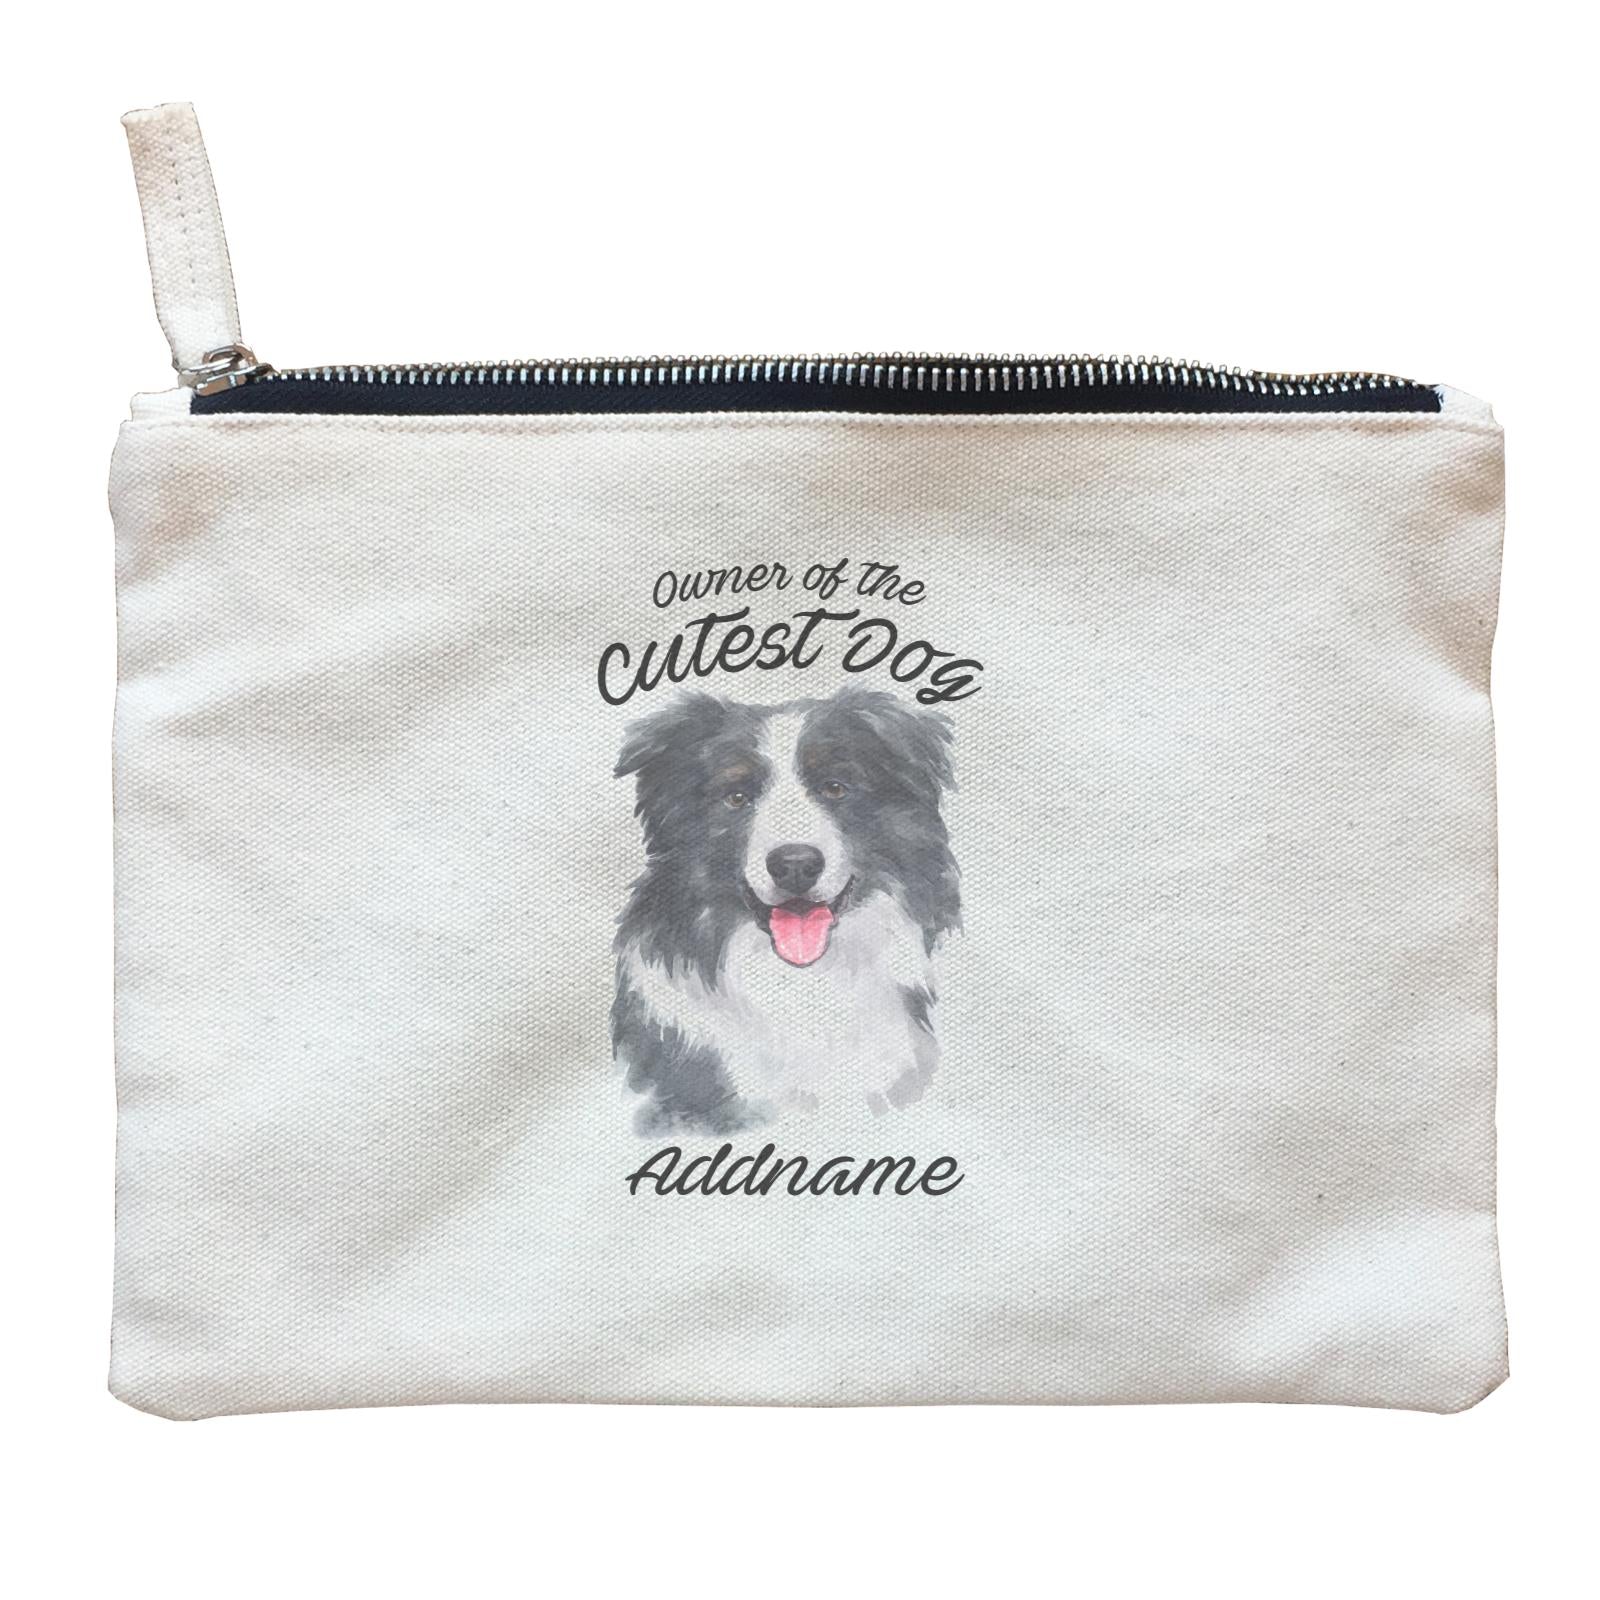 Watercolor Dog Owner Of The Cutest Dog Border Collie Addname Zipper Pouch